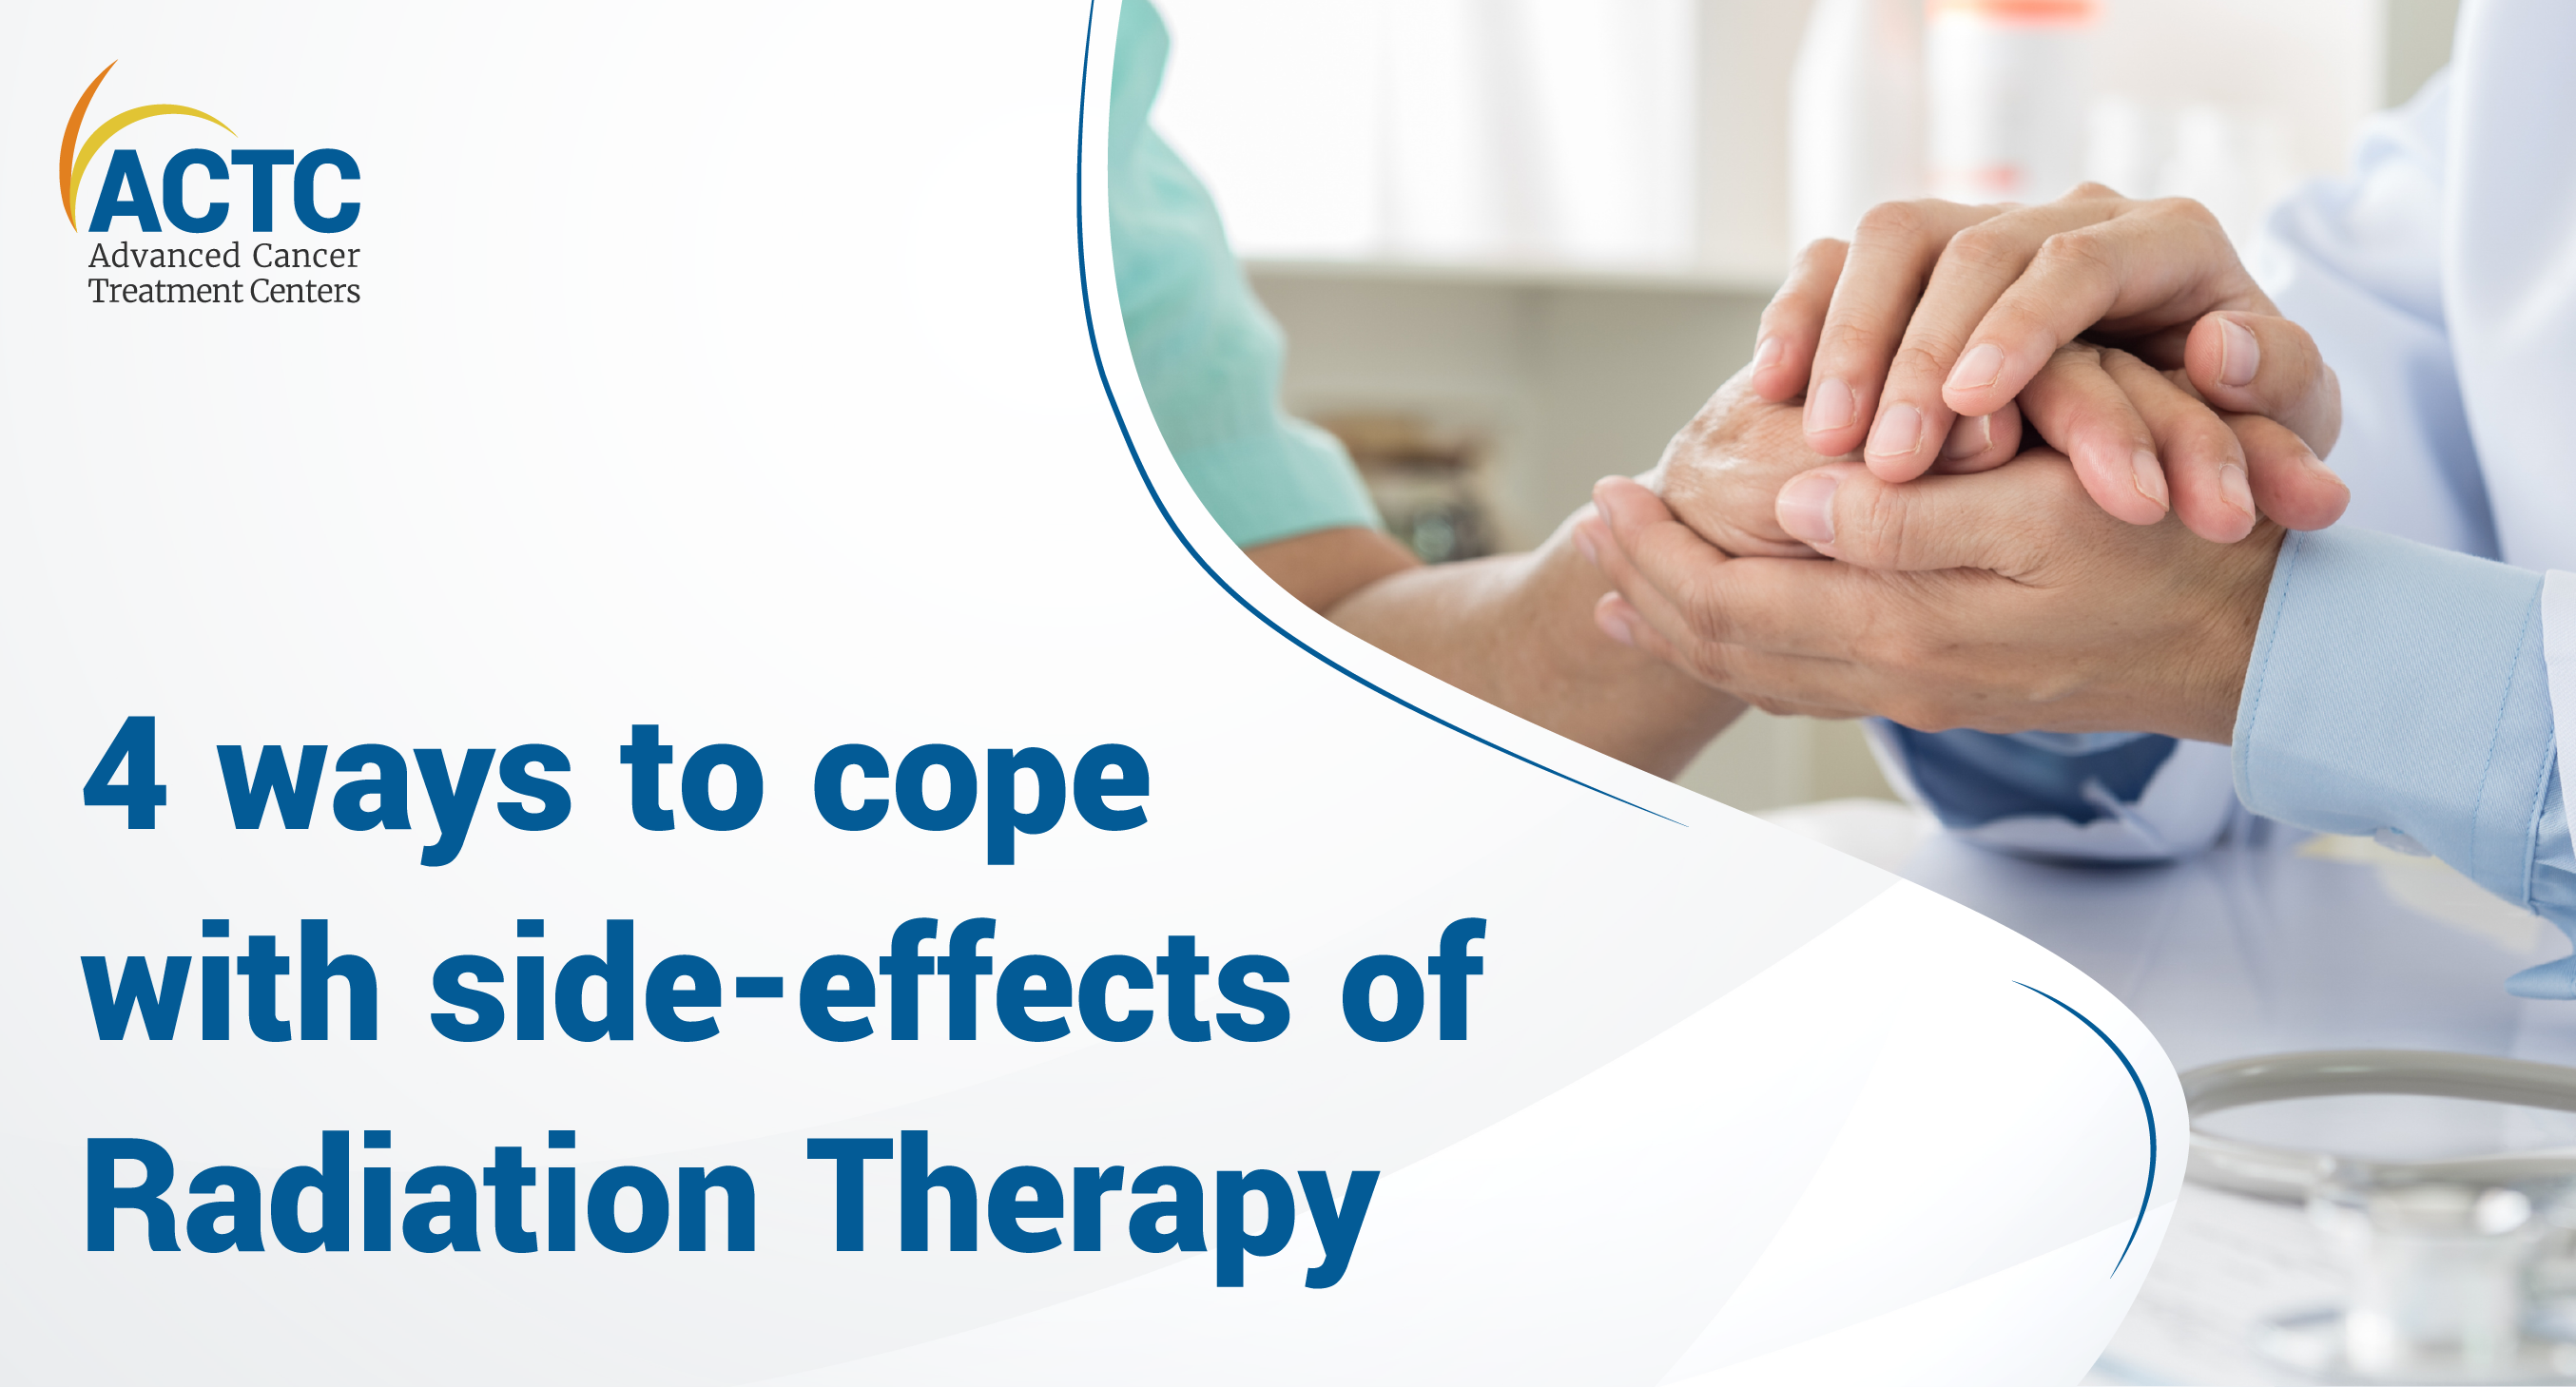 4 ways to cope with side-effects of Radiation Therapy 